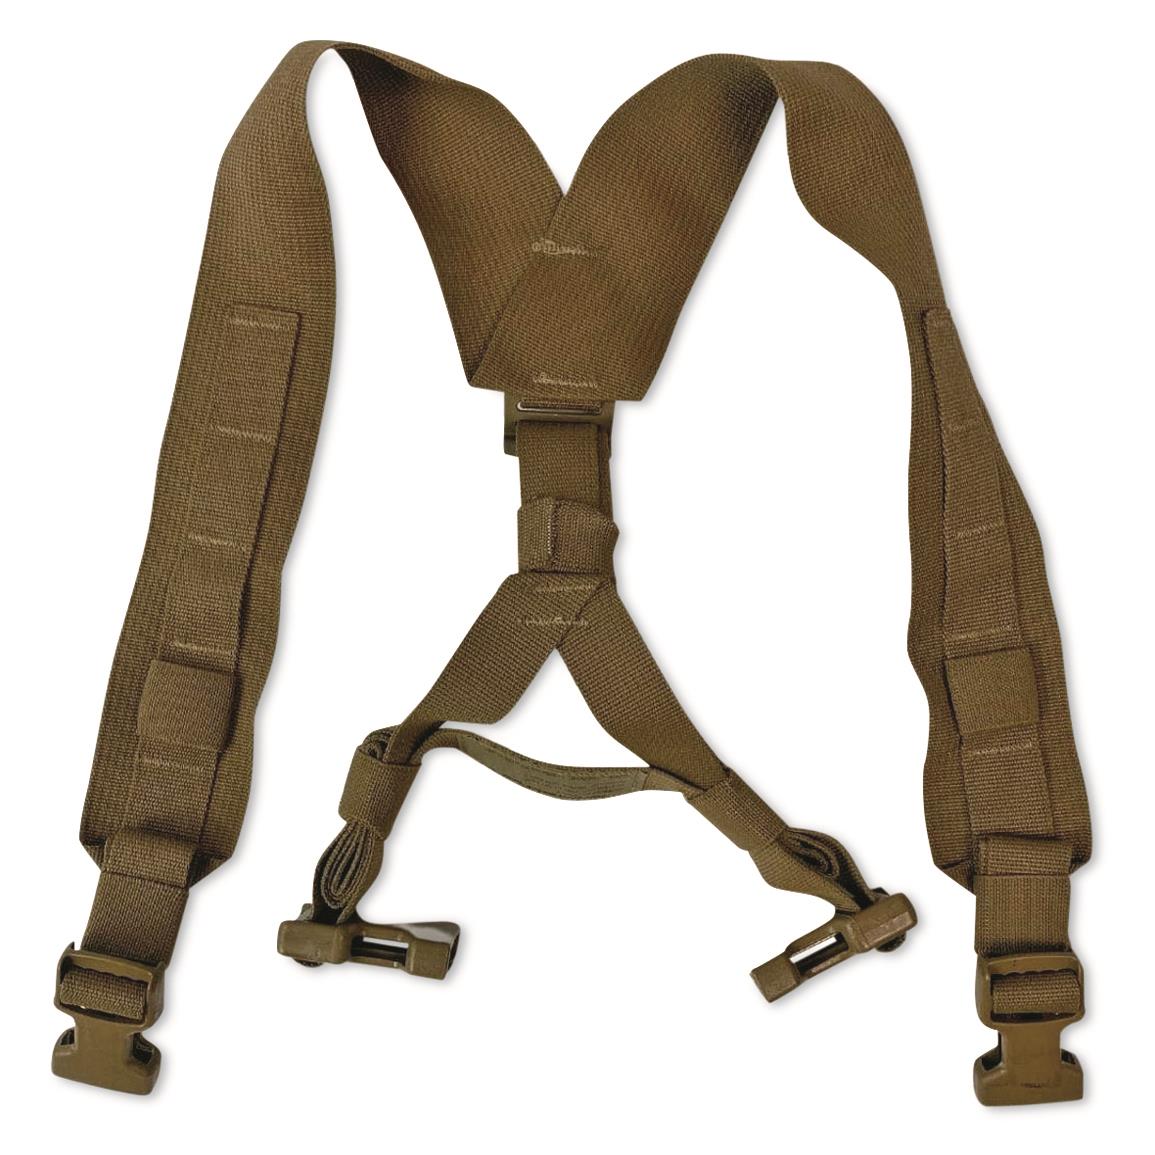 USMC Military Surplus Chest Rig Shoulder Harness, 3 Pack, Used - 733545 ...